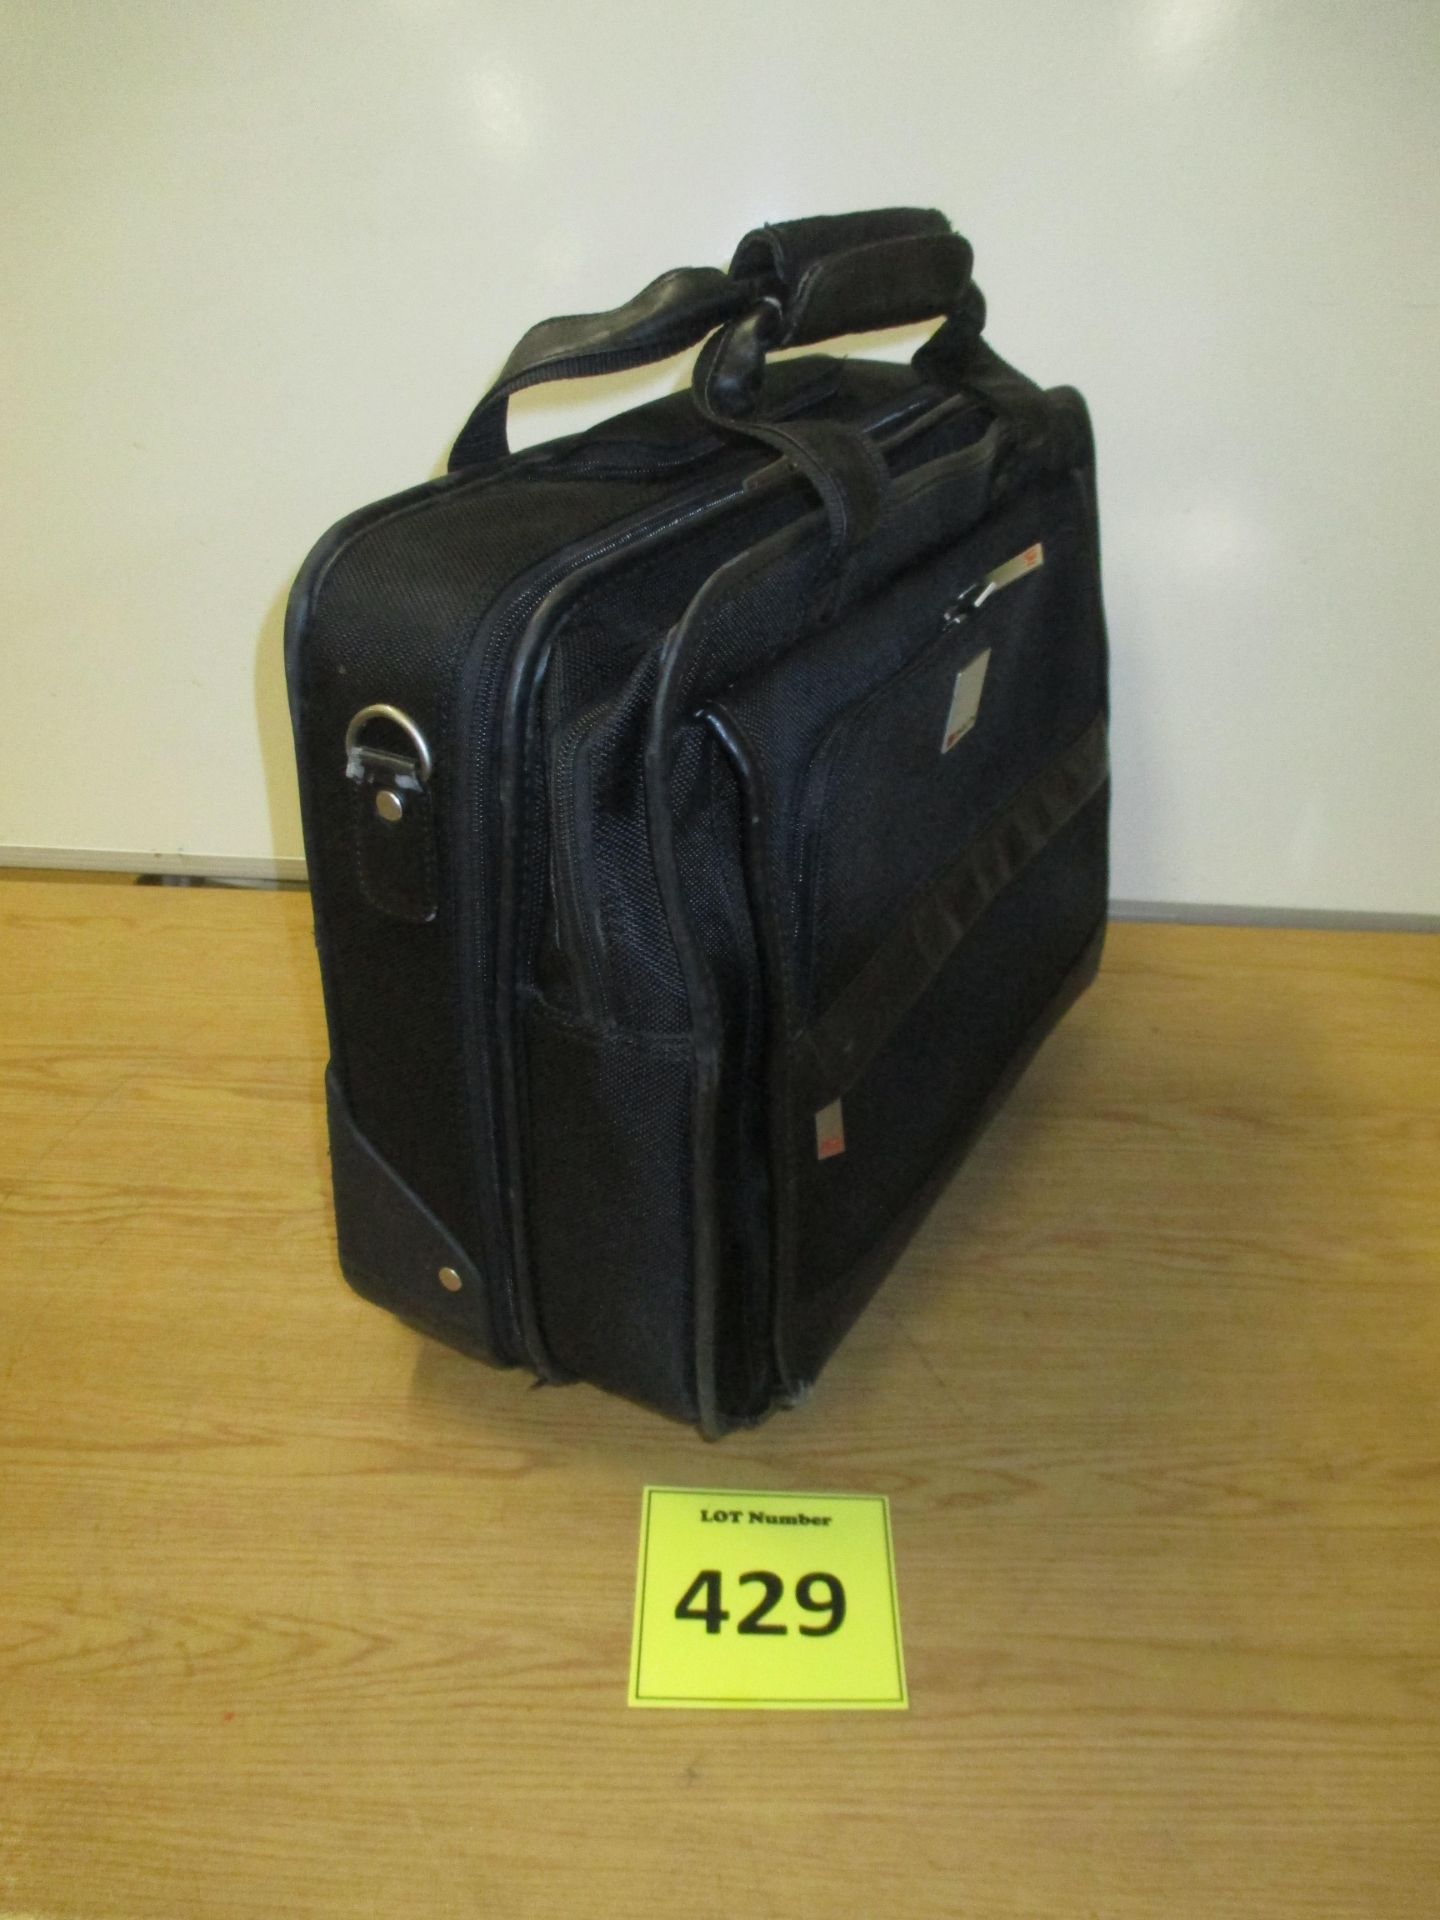 MONOLITH TROLLEY BAG WITH MANY USEFUL COMPARTMENTS FOR LAPTOPS ETC - Image 3 of 3